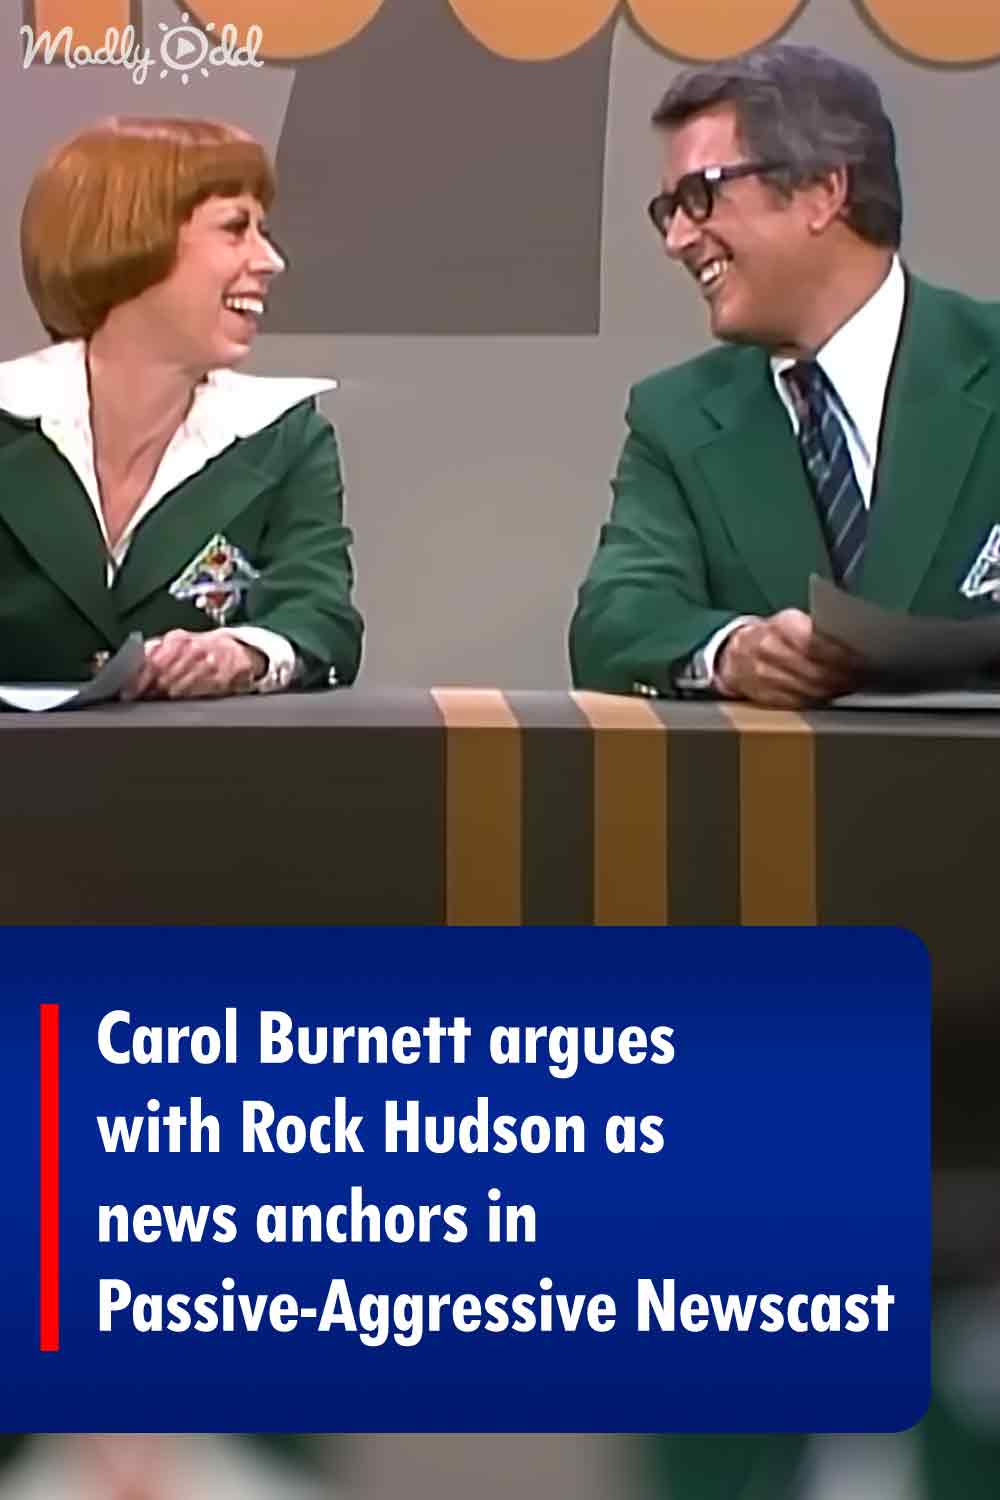 Carol Burnett argues with Rock Hudson as news anchors in Passive-Aggressive Newscast